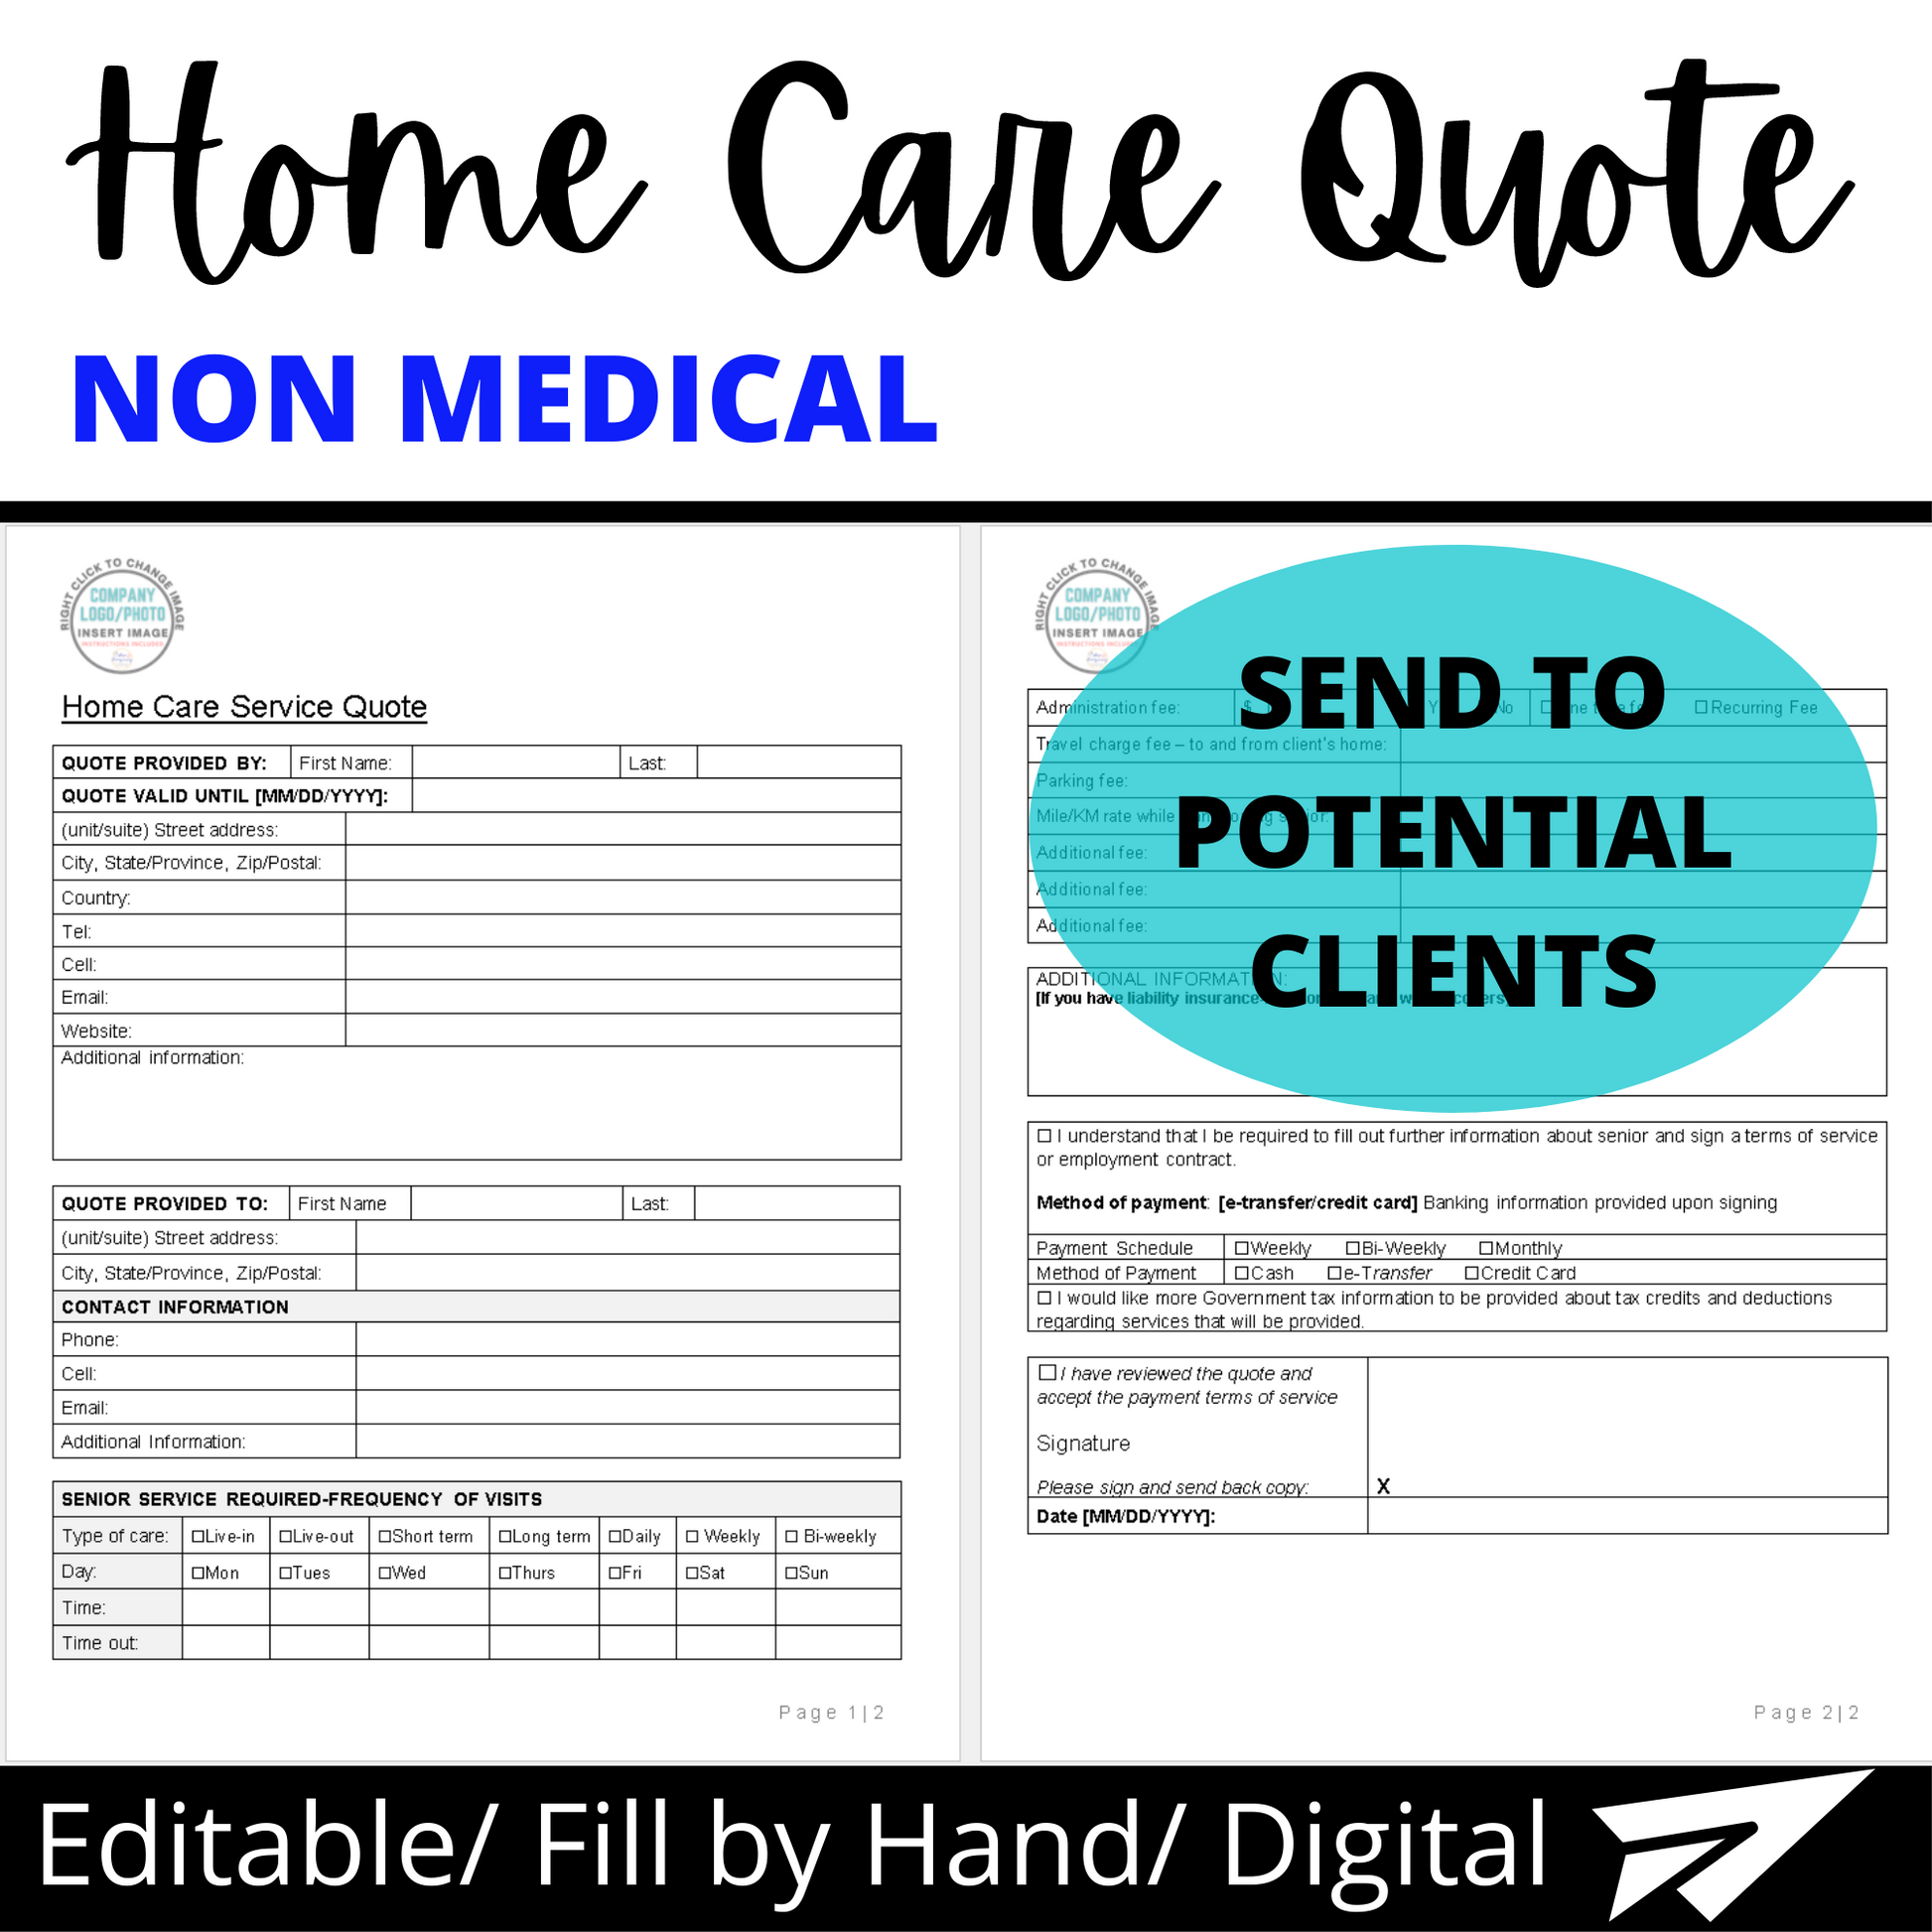 Home Care Quote, Proposal for Senior Care, Caregiving Template, Elder Care, Personal Care Aid, Send JobQuote Fast Electronically! Add LOGO